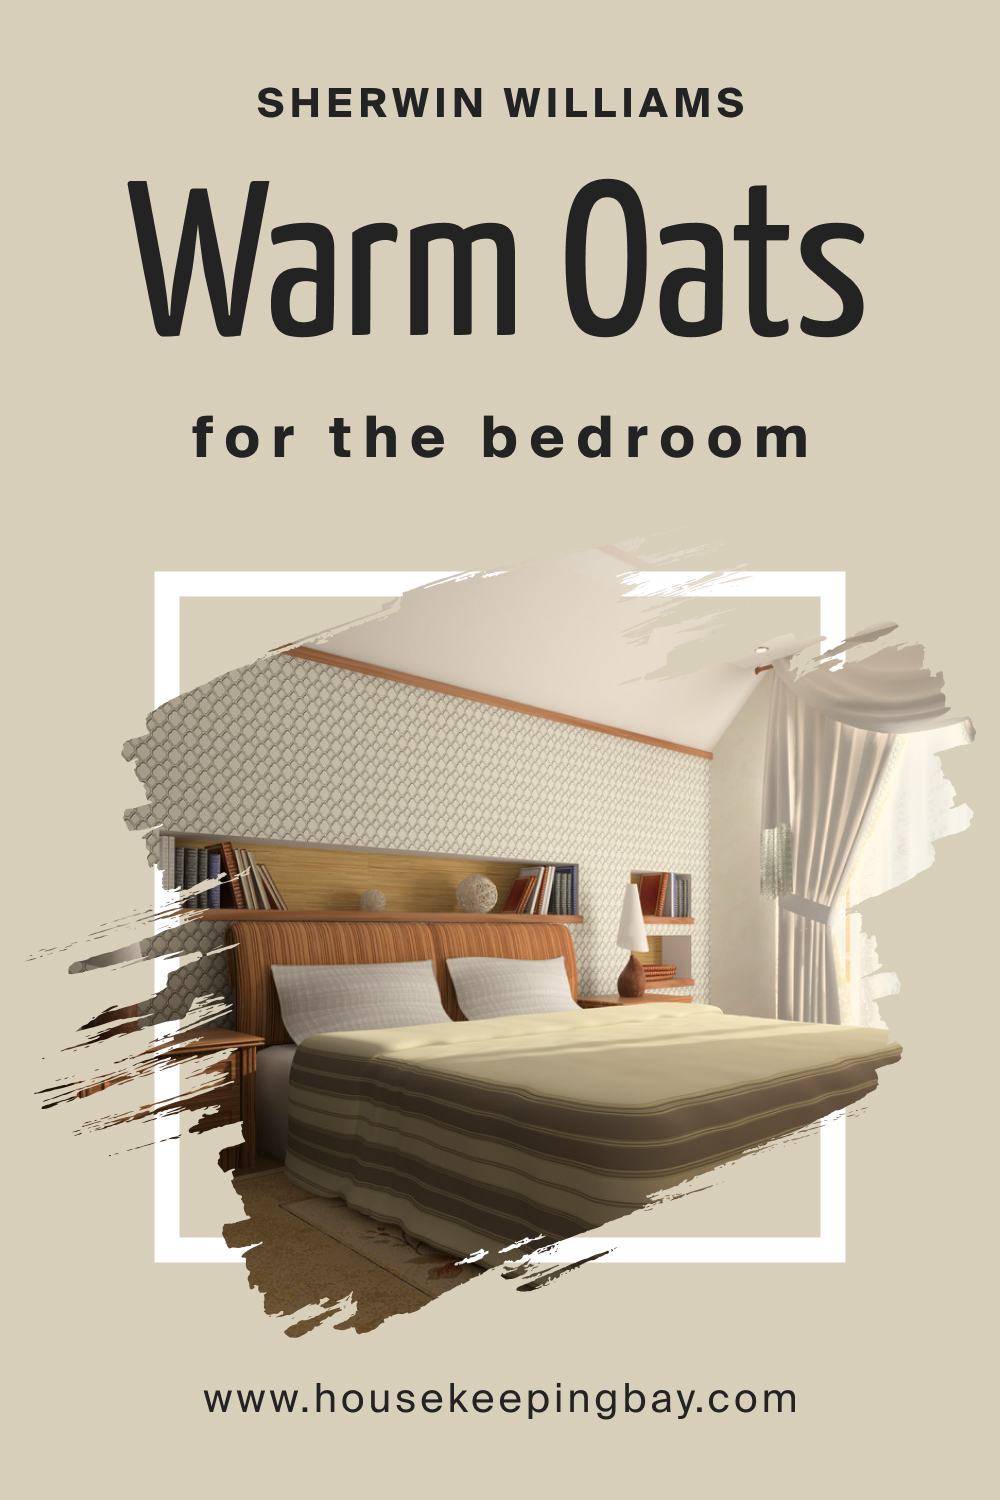 Sherwin Williams. SW 9511 Warm Oats For the bedroom